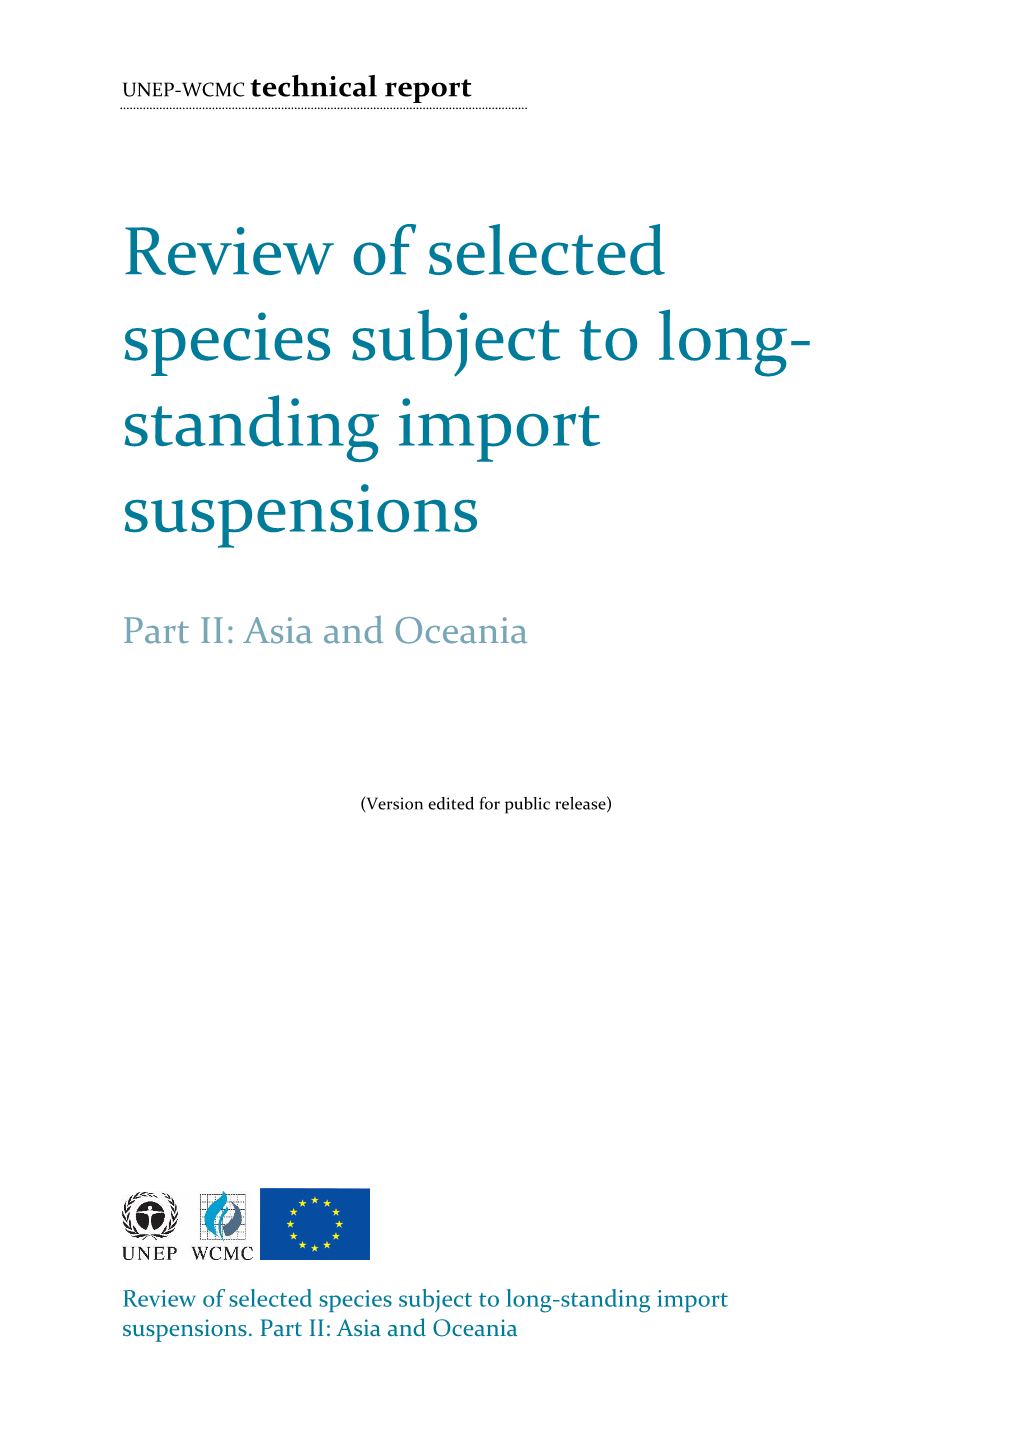 Review of Selected Species Subject to Long- Standing Import Suspensions